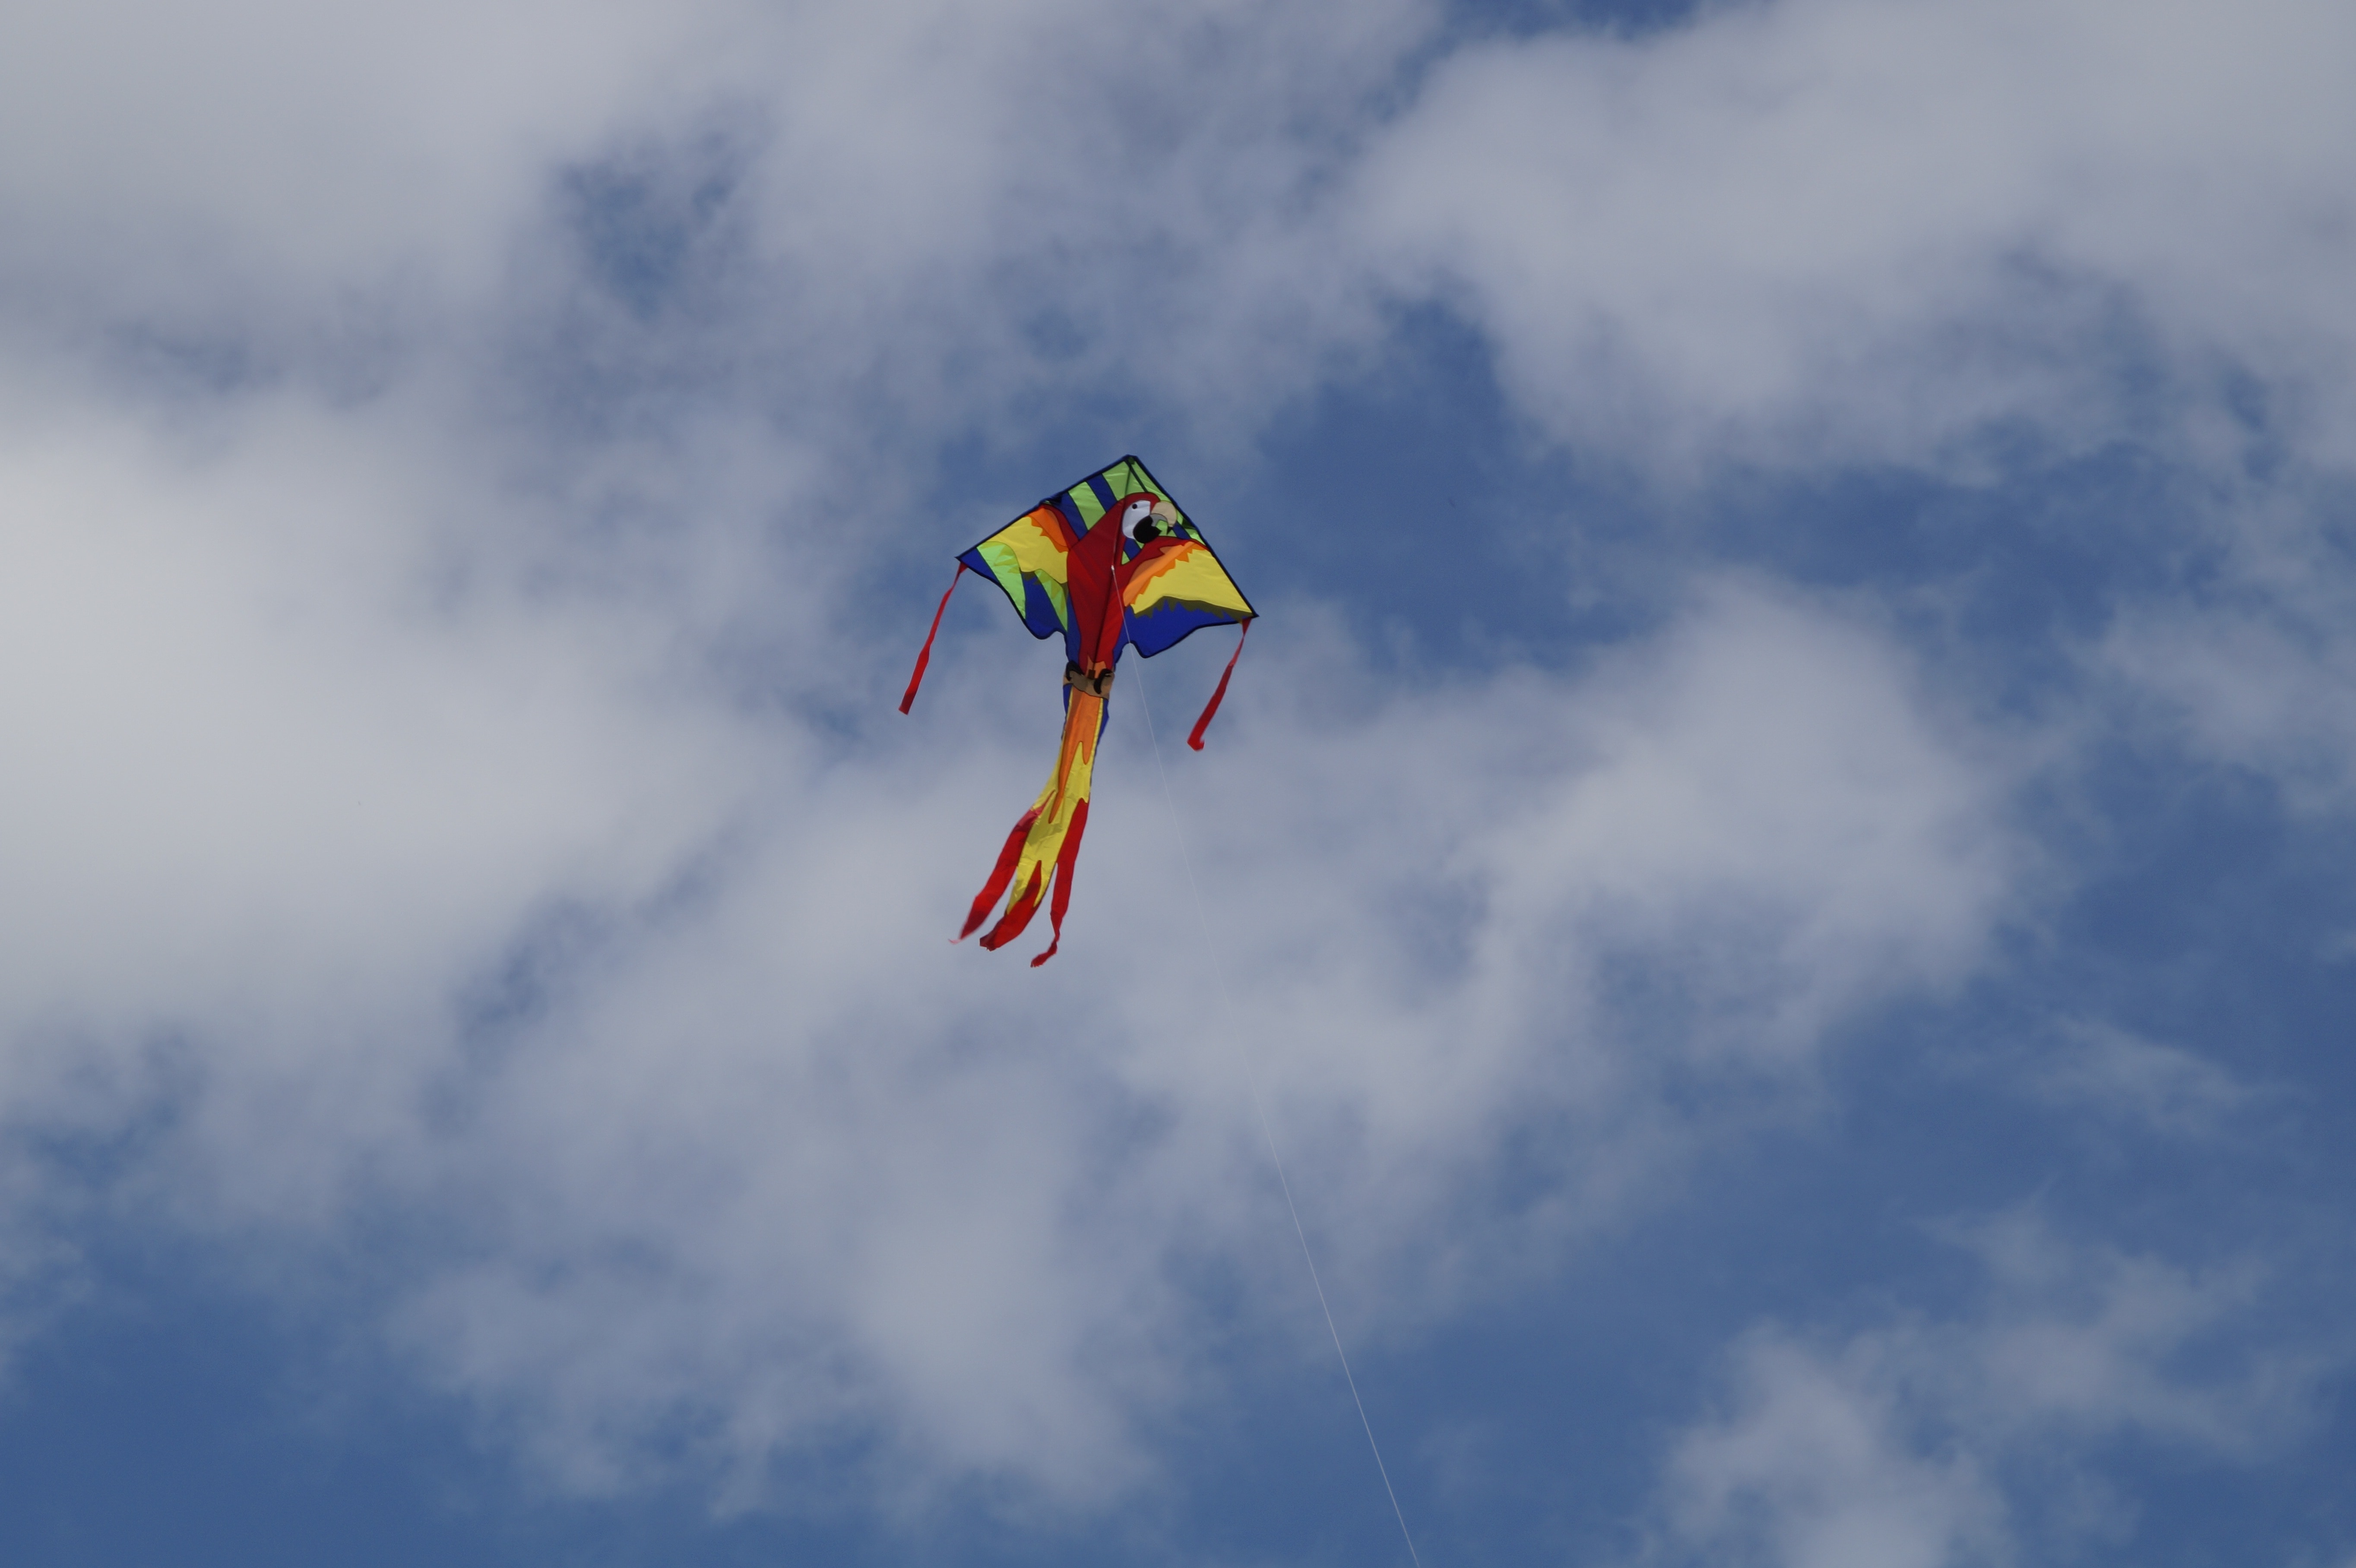 scarlet macaw kite on mid air under cloudy sky during daytime